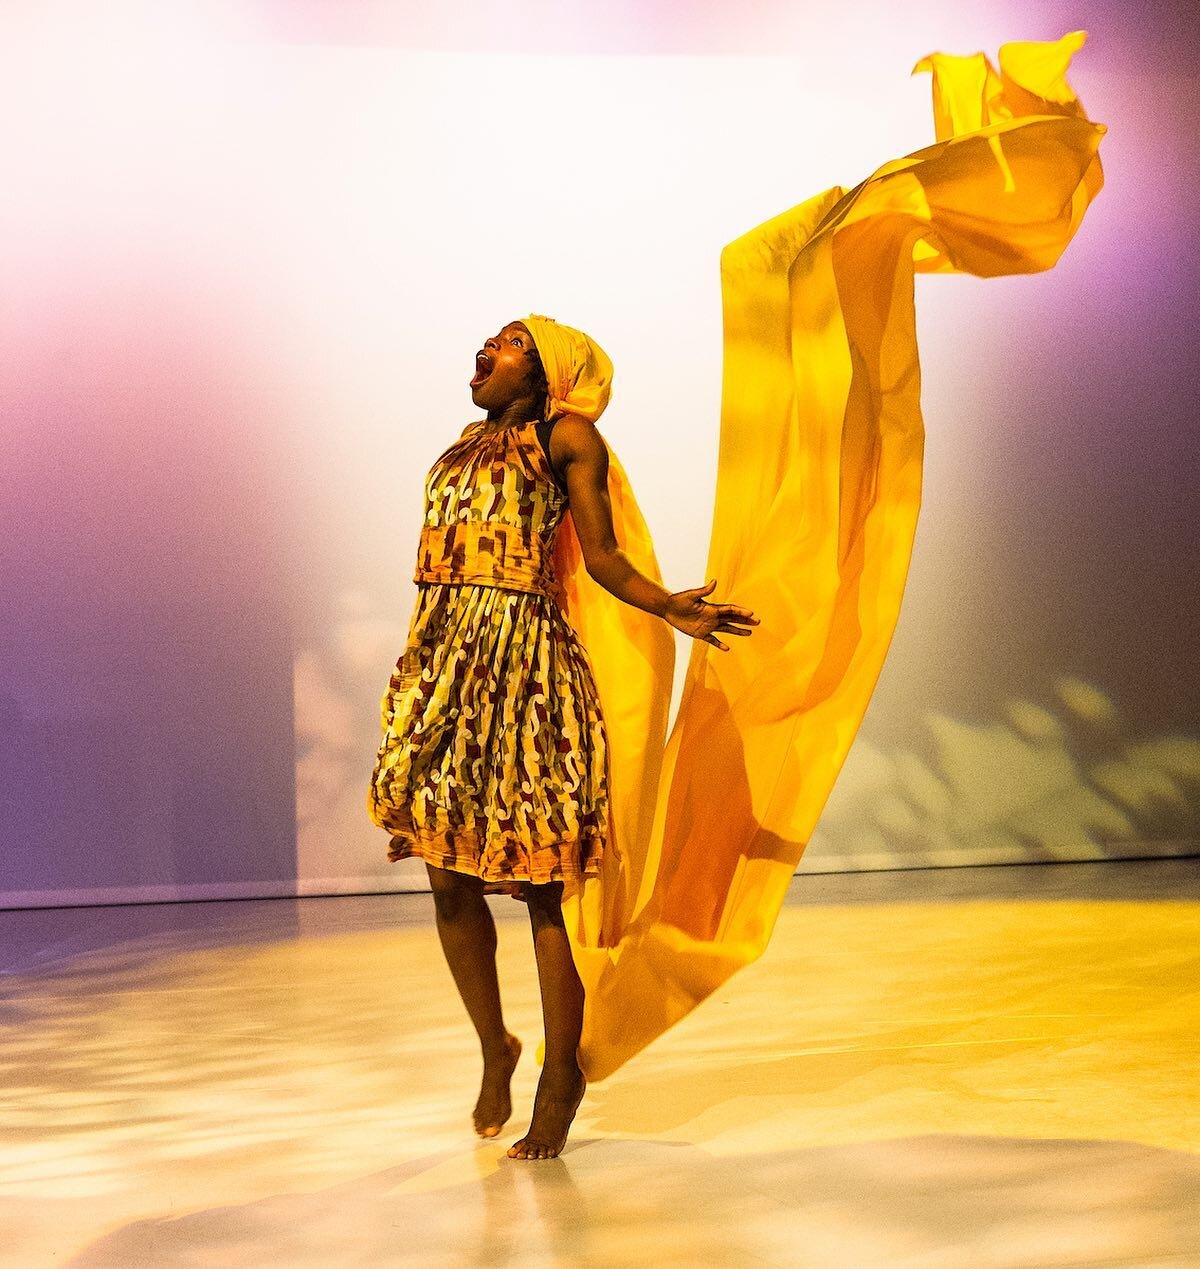 #fromthearchives - @uchenna_dance&rsquo;s incredible 'The Head Wrap Diaries,' performed @theplacelondon in 2016 💛 Choreographed by Uchenna Dance's Founder @vicki_igbokwe, and produced by Grace Okereke of Uprise Rebel.

Set within a South London hair